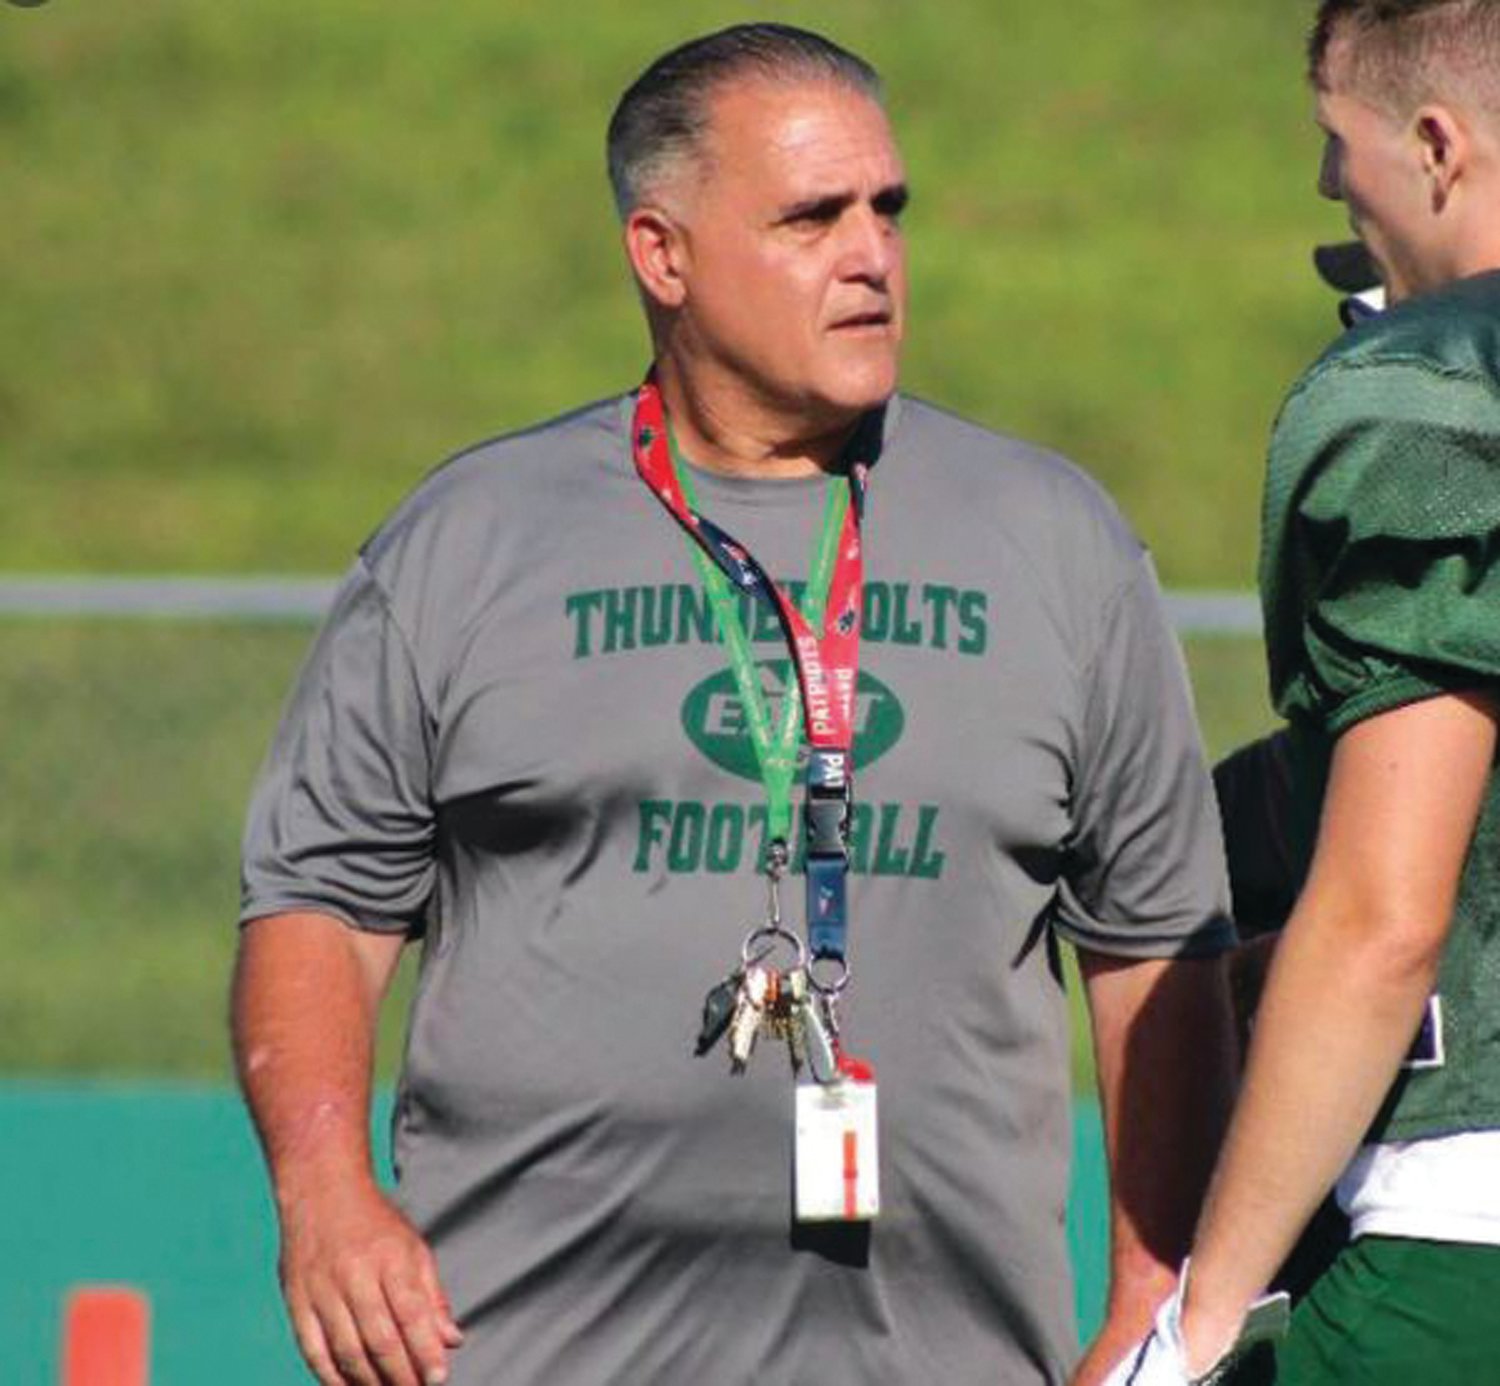 STEPPING AWAY: Cranston East football coach Tom Centore during the 2019 season. (Herald file photos)